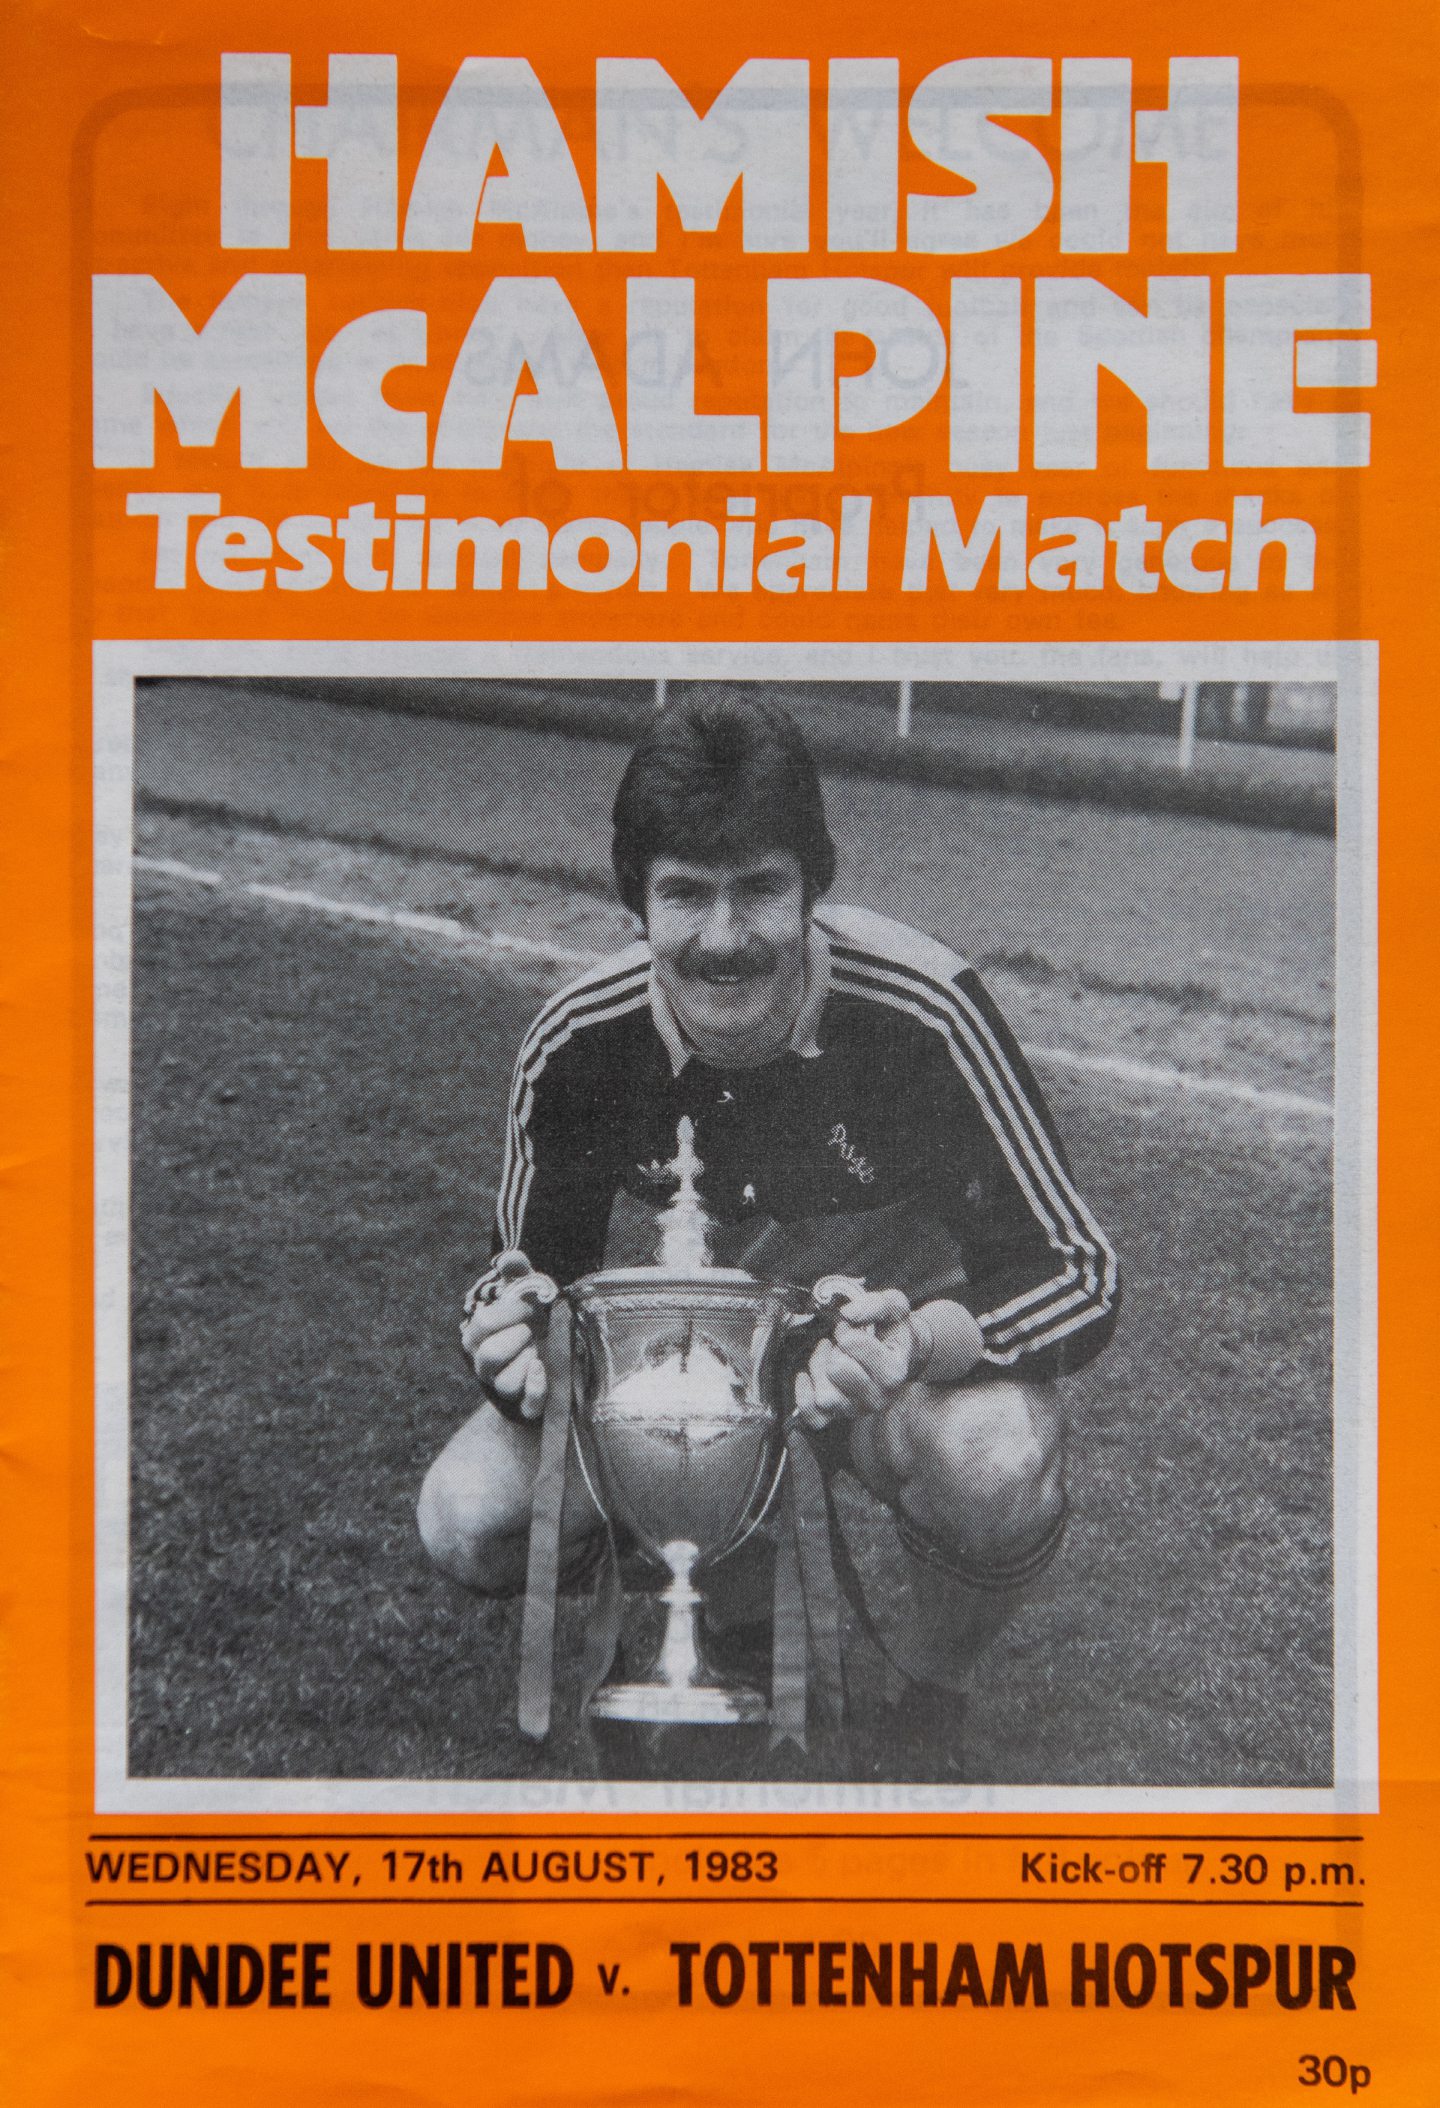 The matchday programme for McAlpine's big day, which cost 30p in 1983. Image: Kim Cessford/DC Thomson.